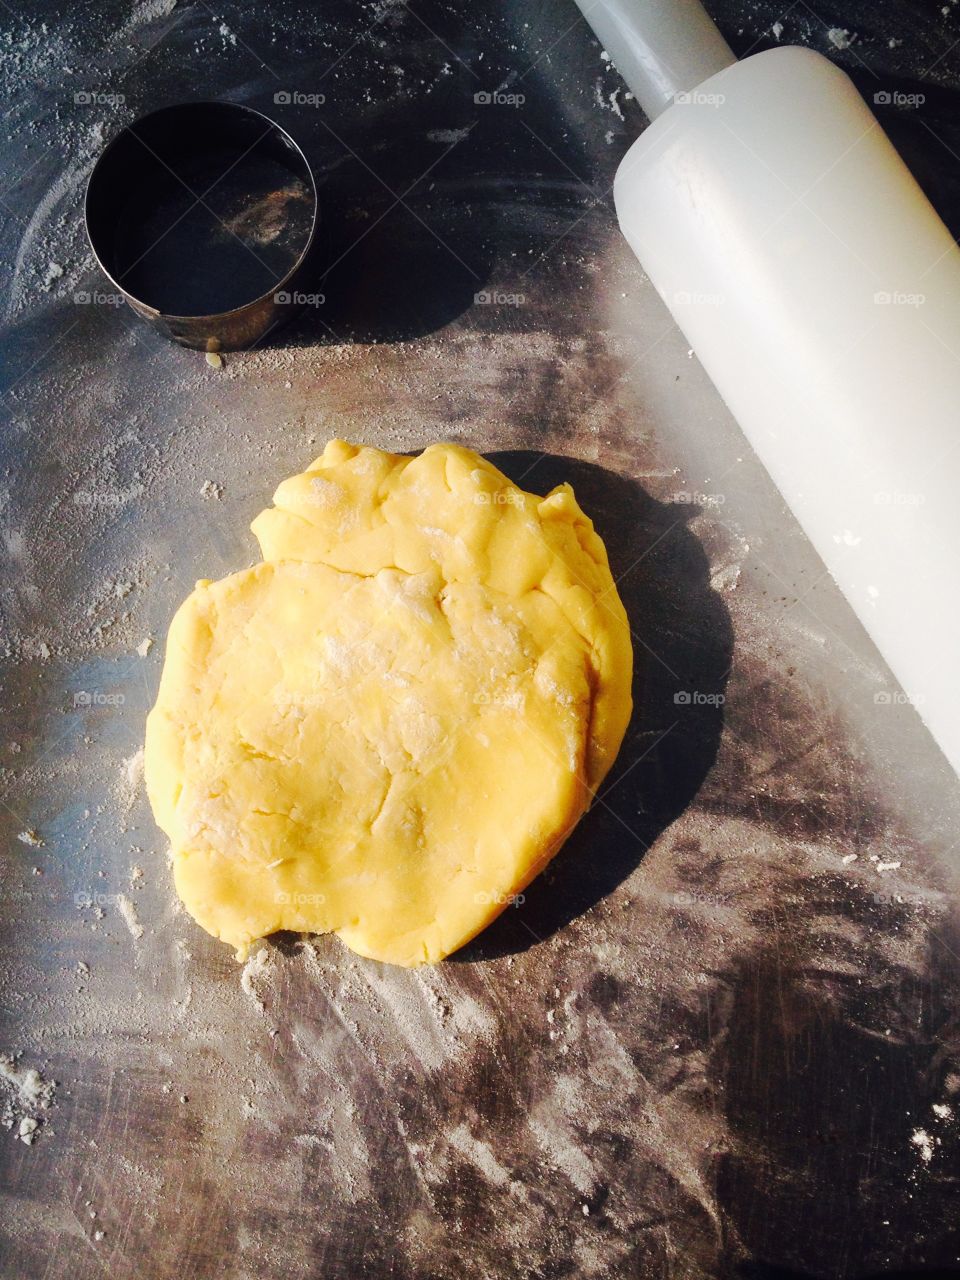 The dough. My kitchen's stories
